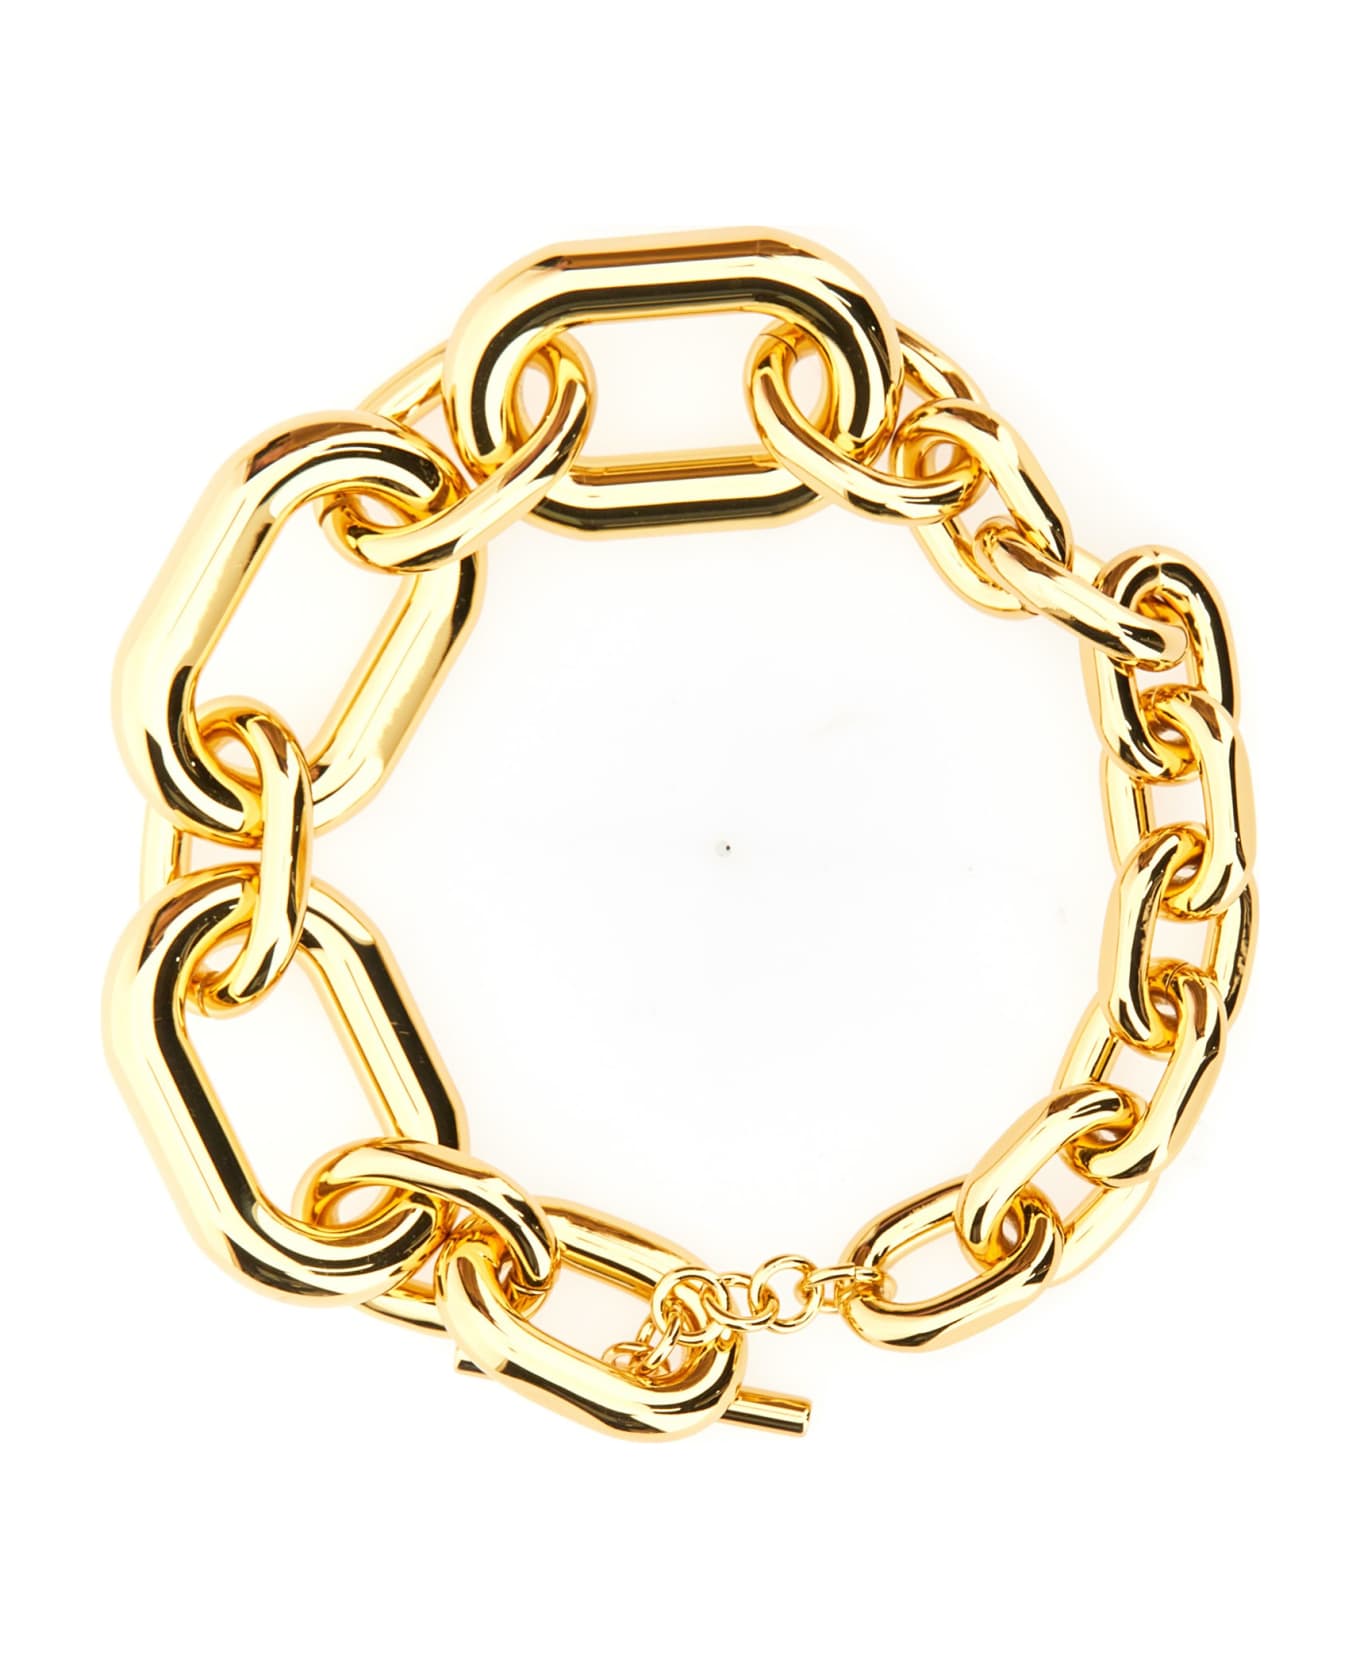 Paco Rabanne Xi Link Necklace - Gold